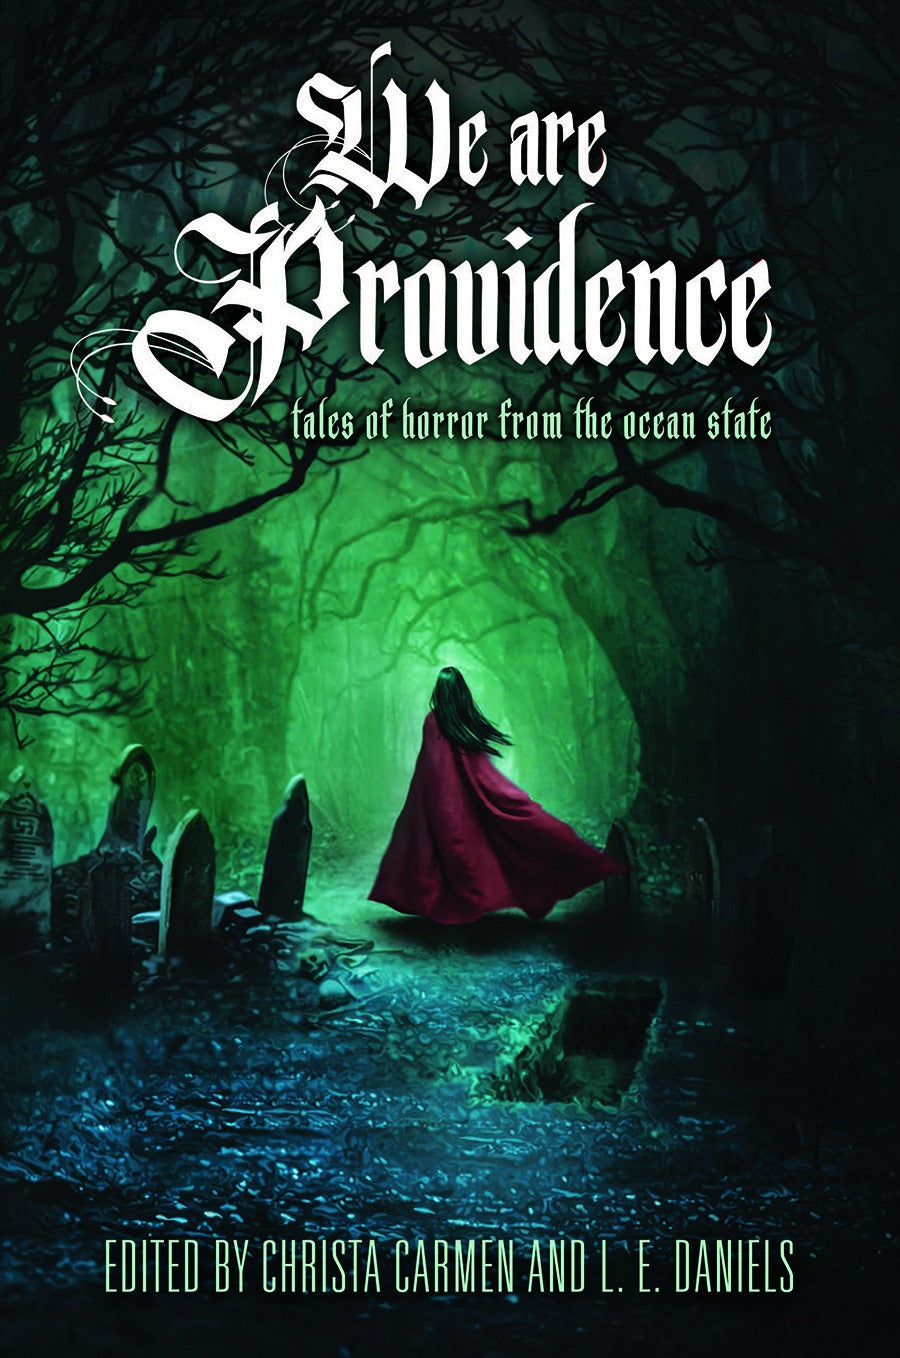 We Are Providence Edited By Christa Carmen and L. E. Daniels